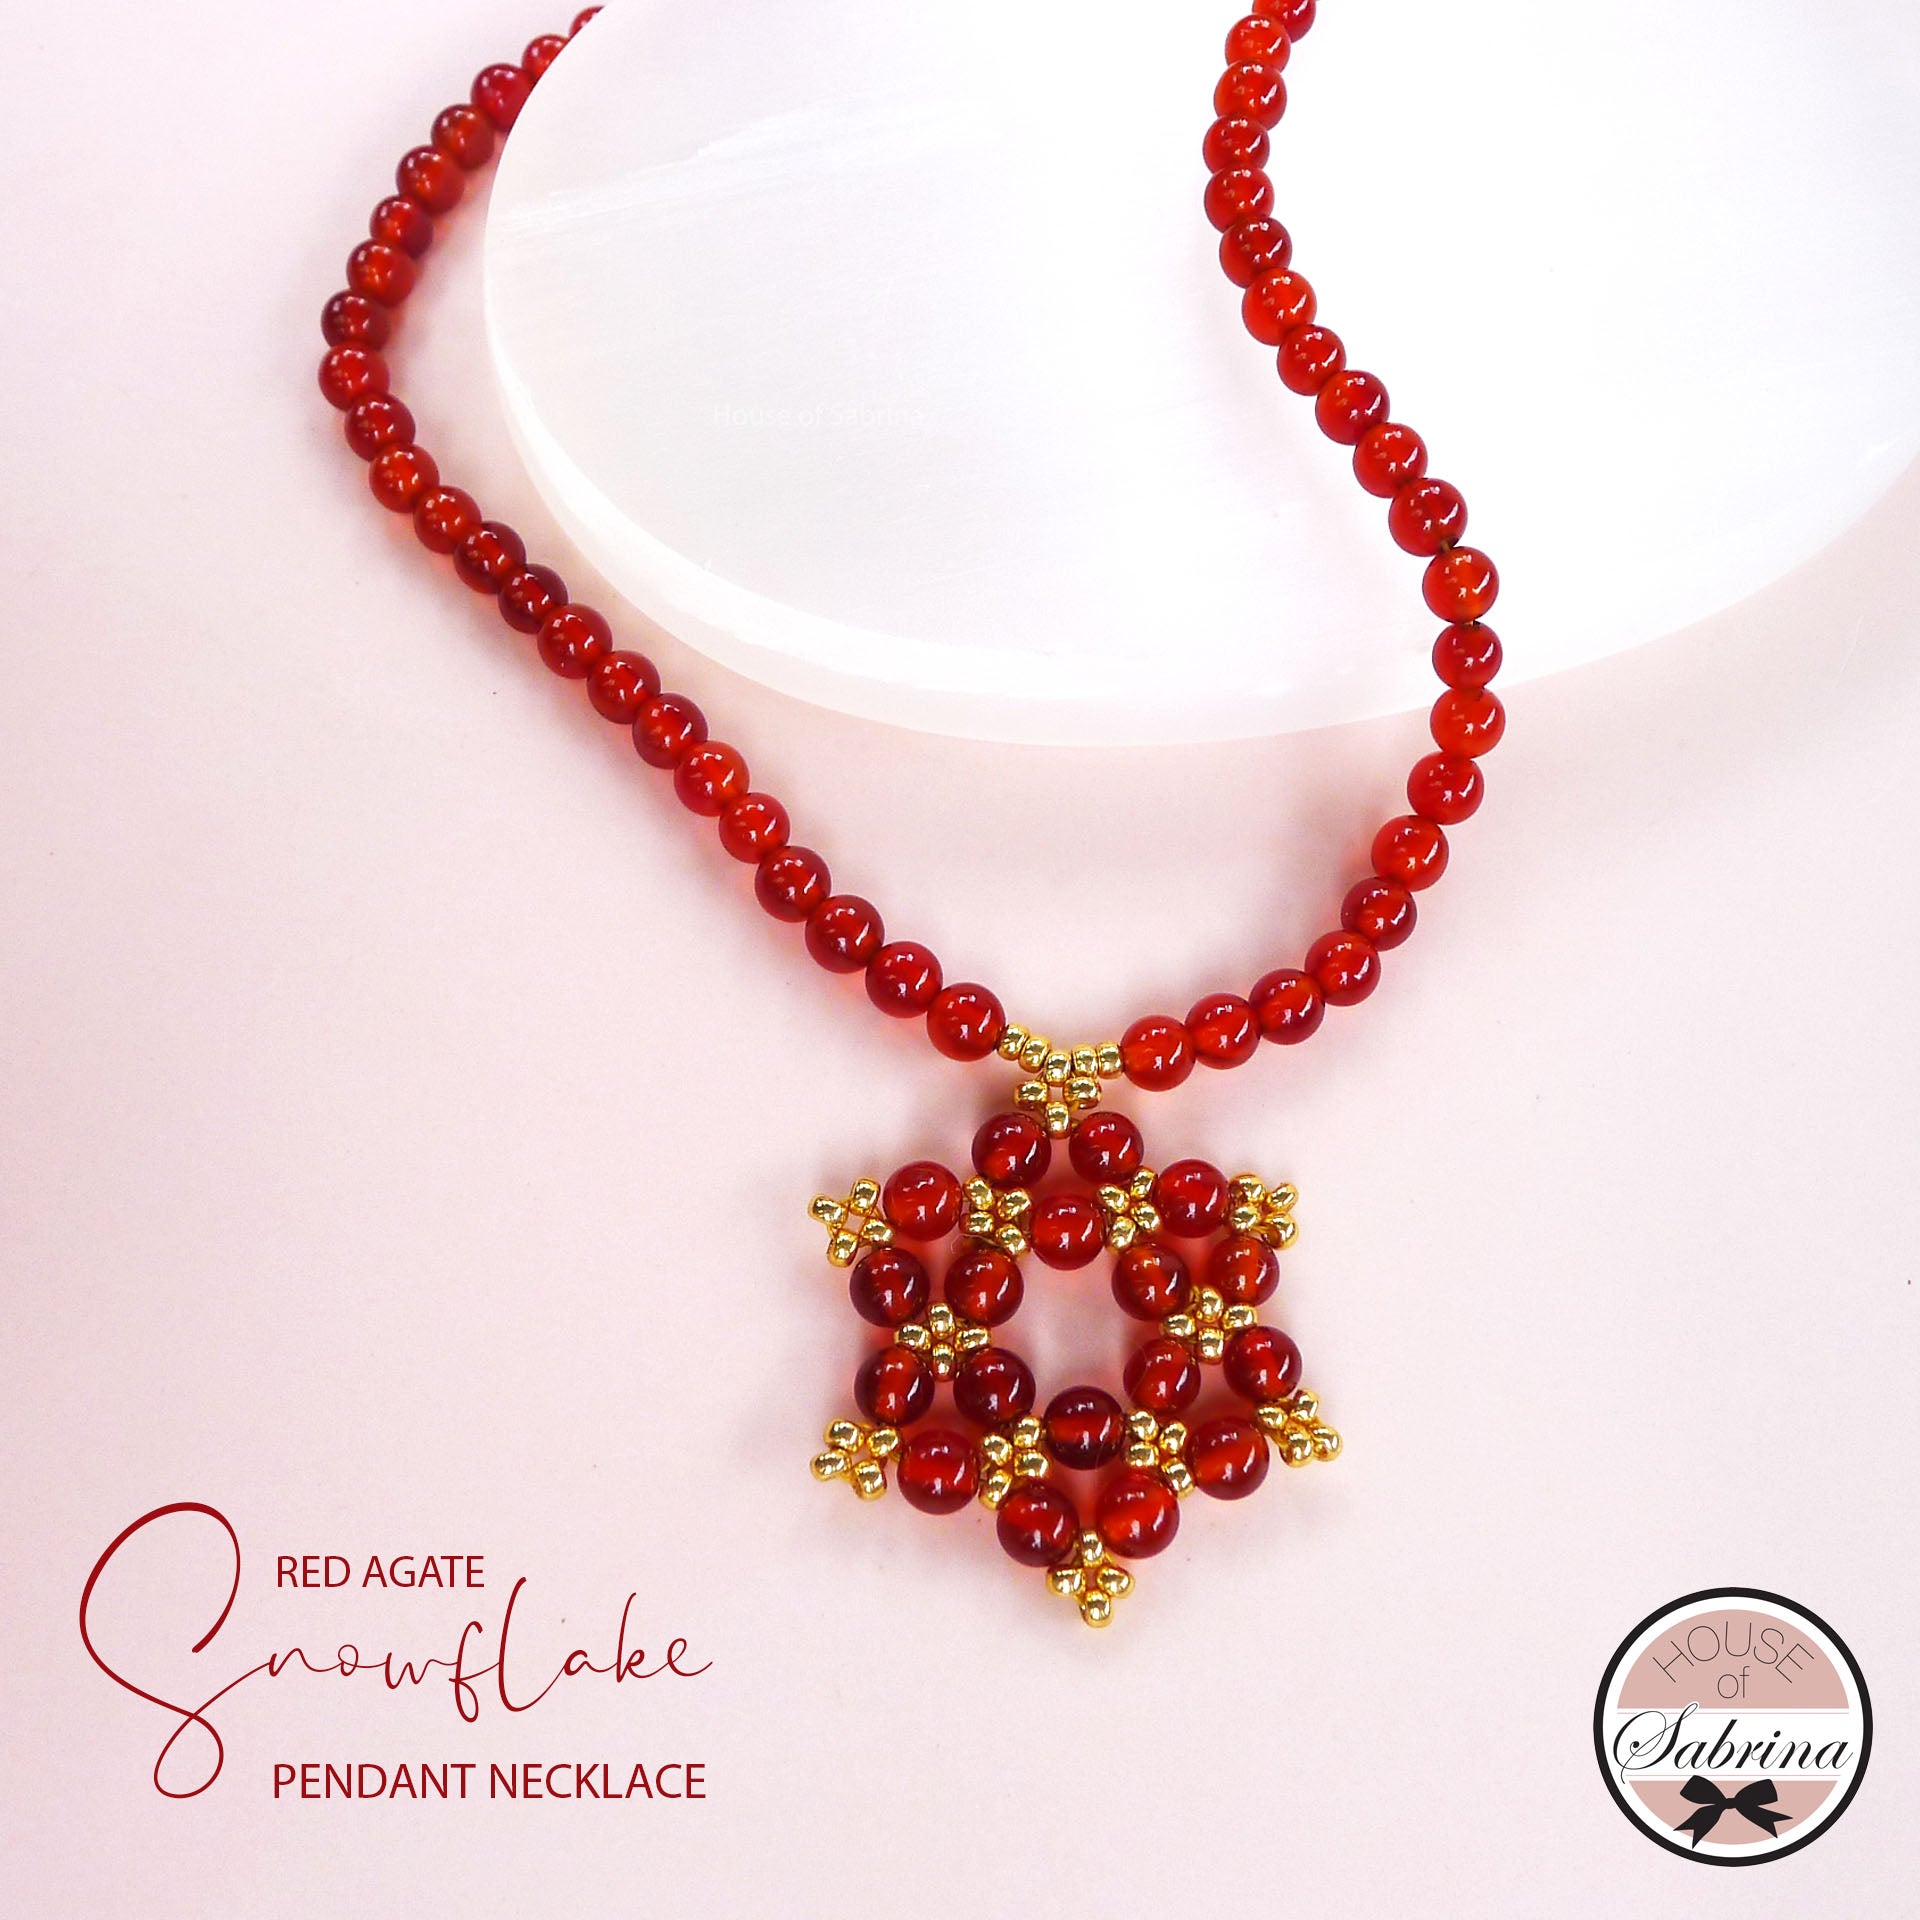 RED AGATE SNOWFLAKE NECKLACE